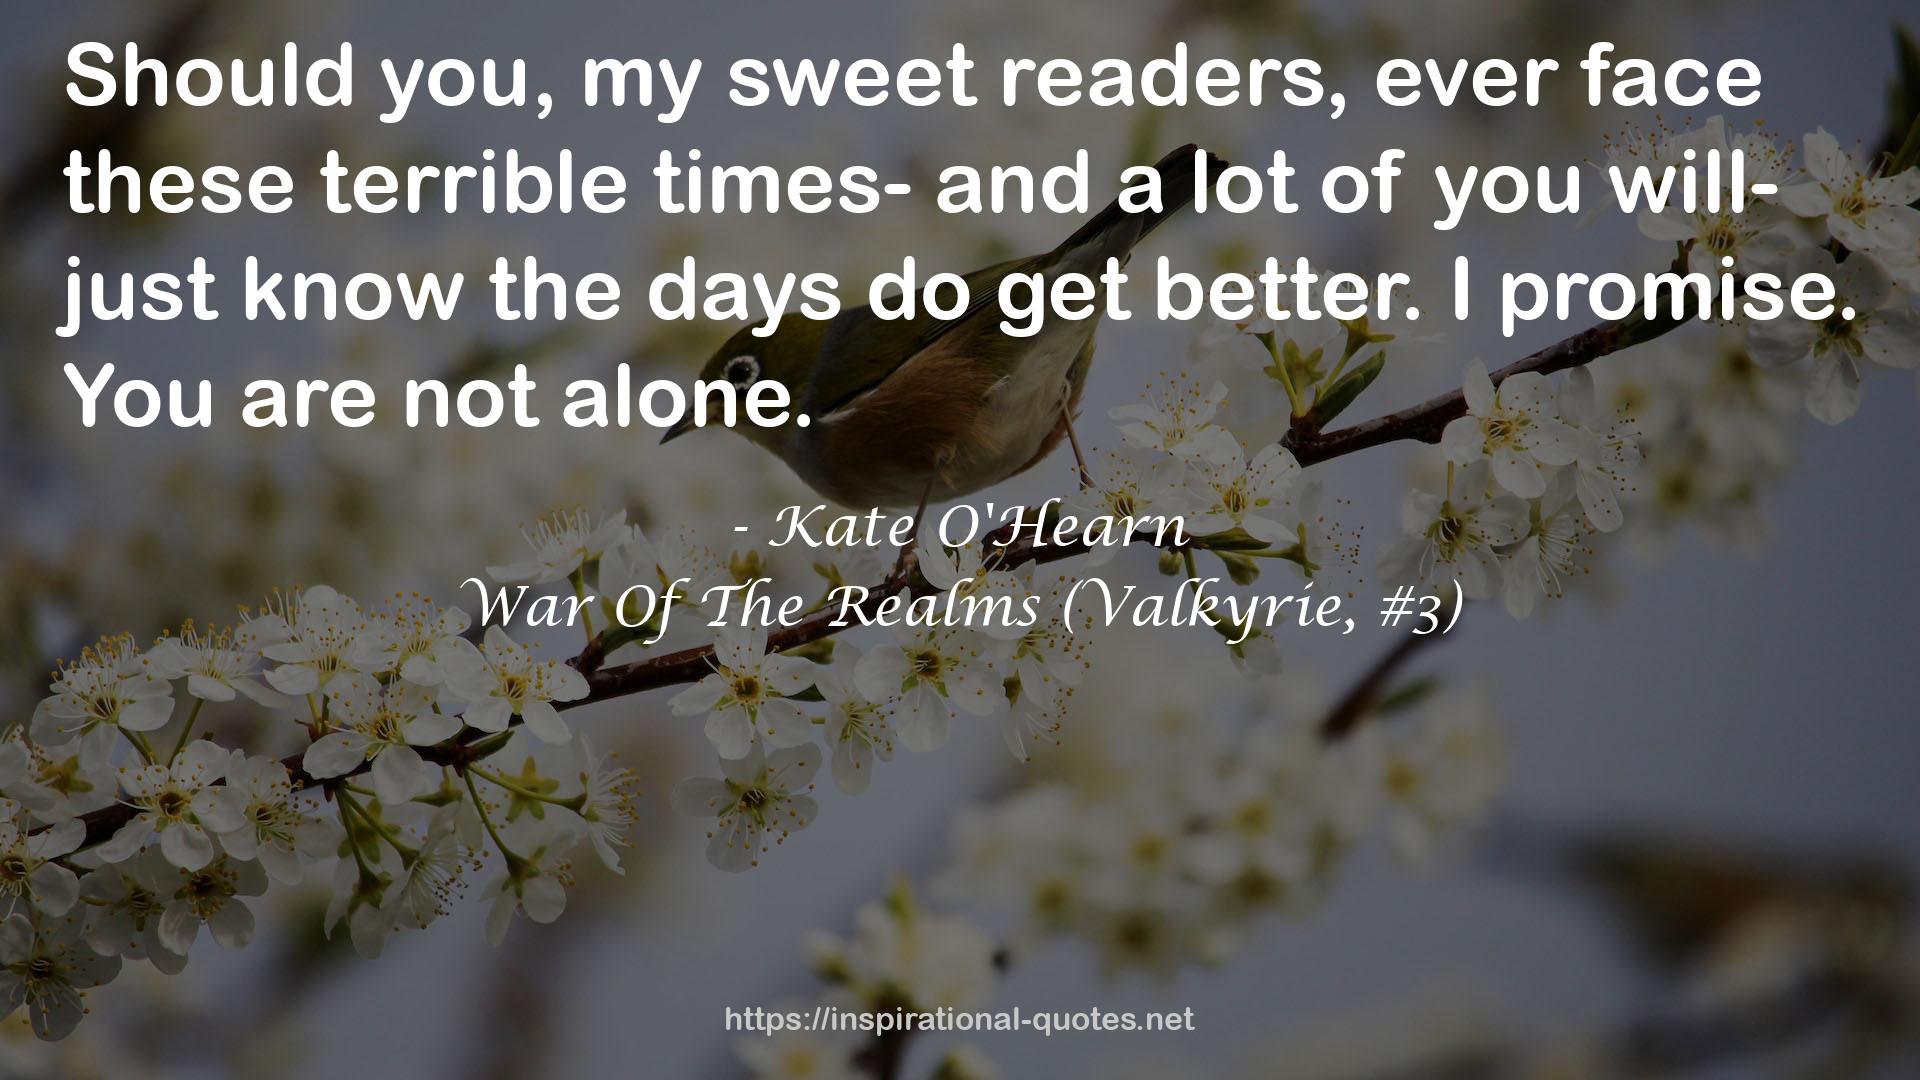 Kate O'Hearn QUOTES